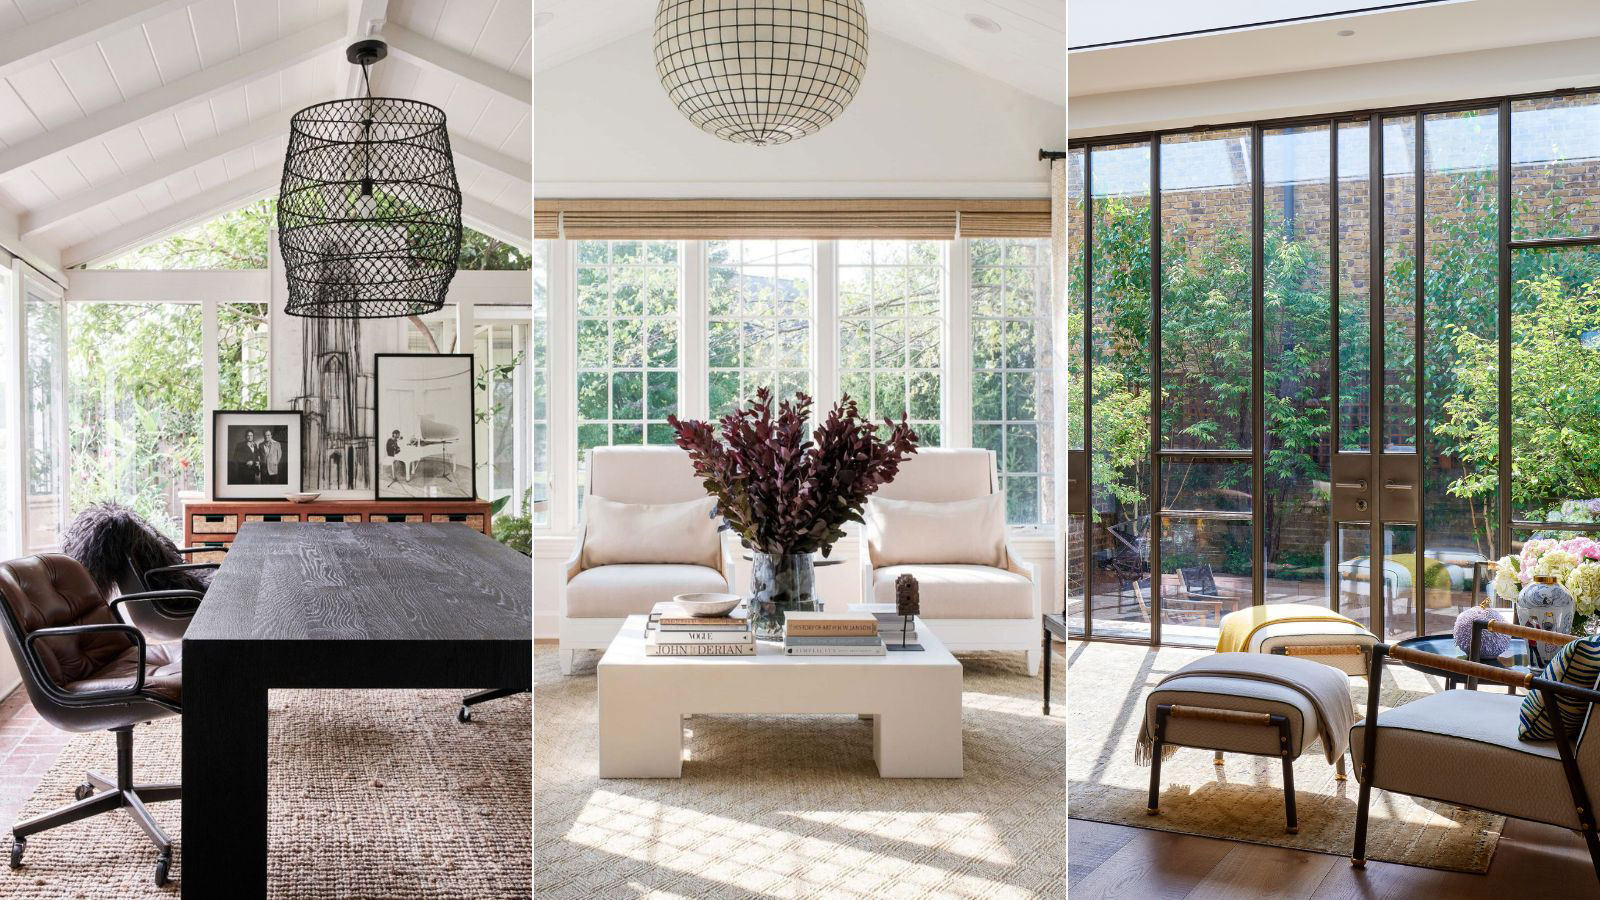 Sunroom ideas – 19 high-style room designs that let the light in